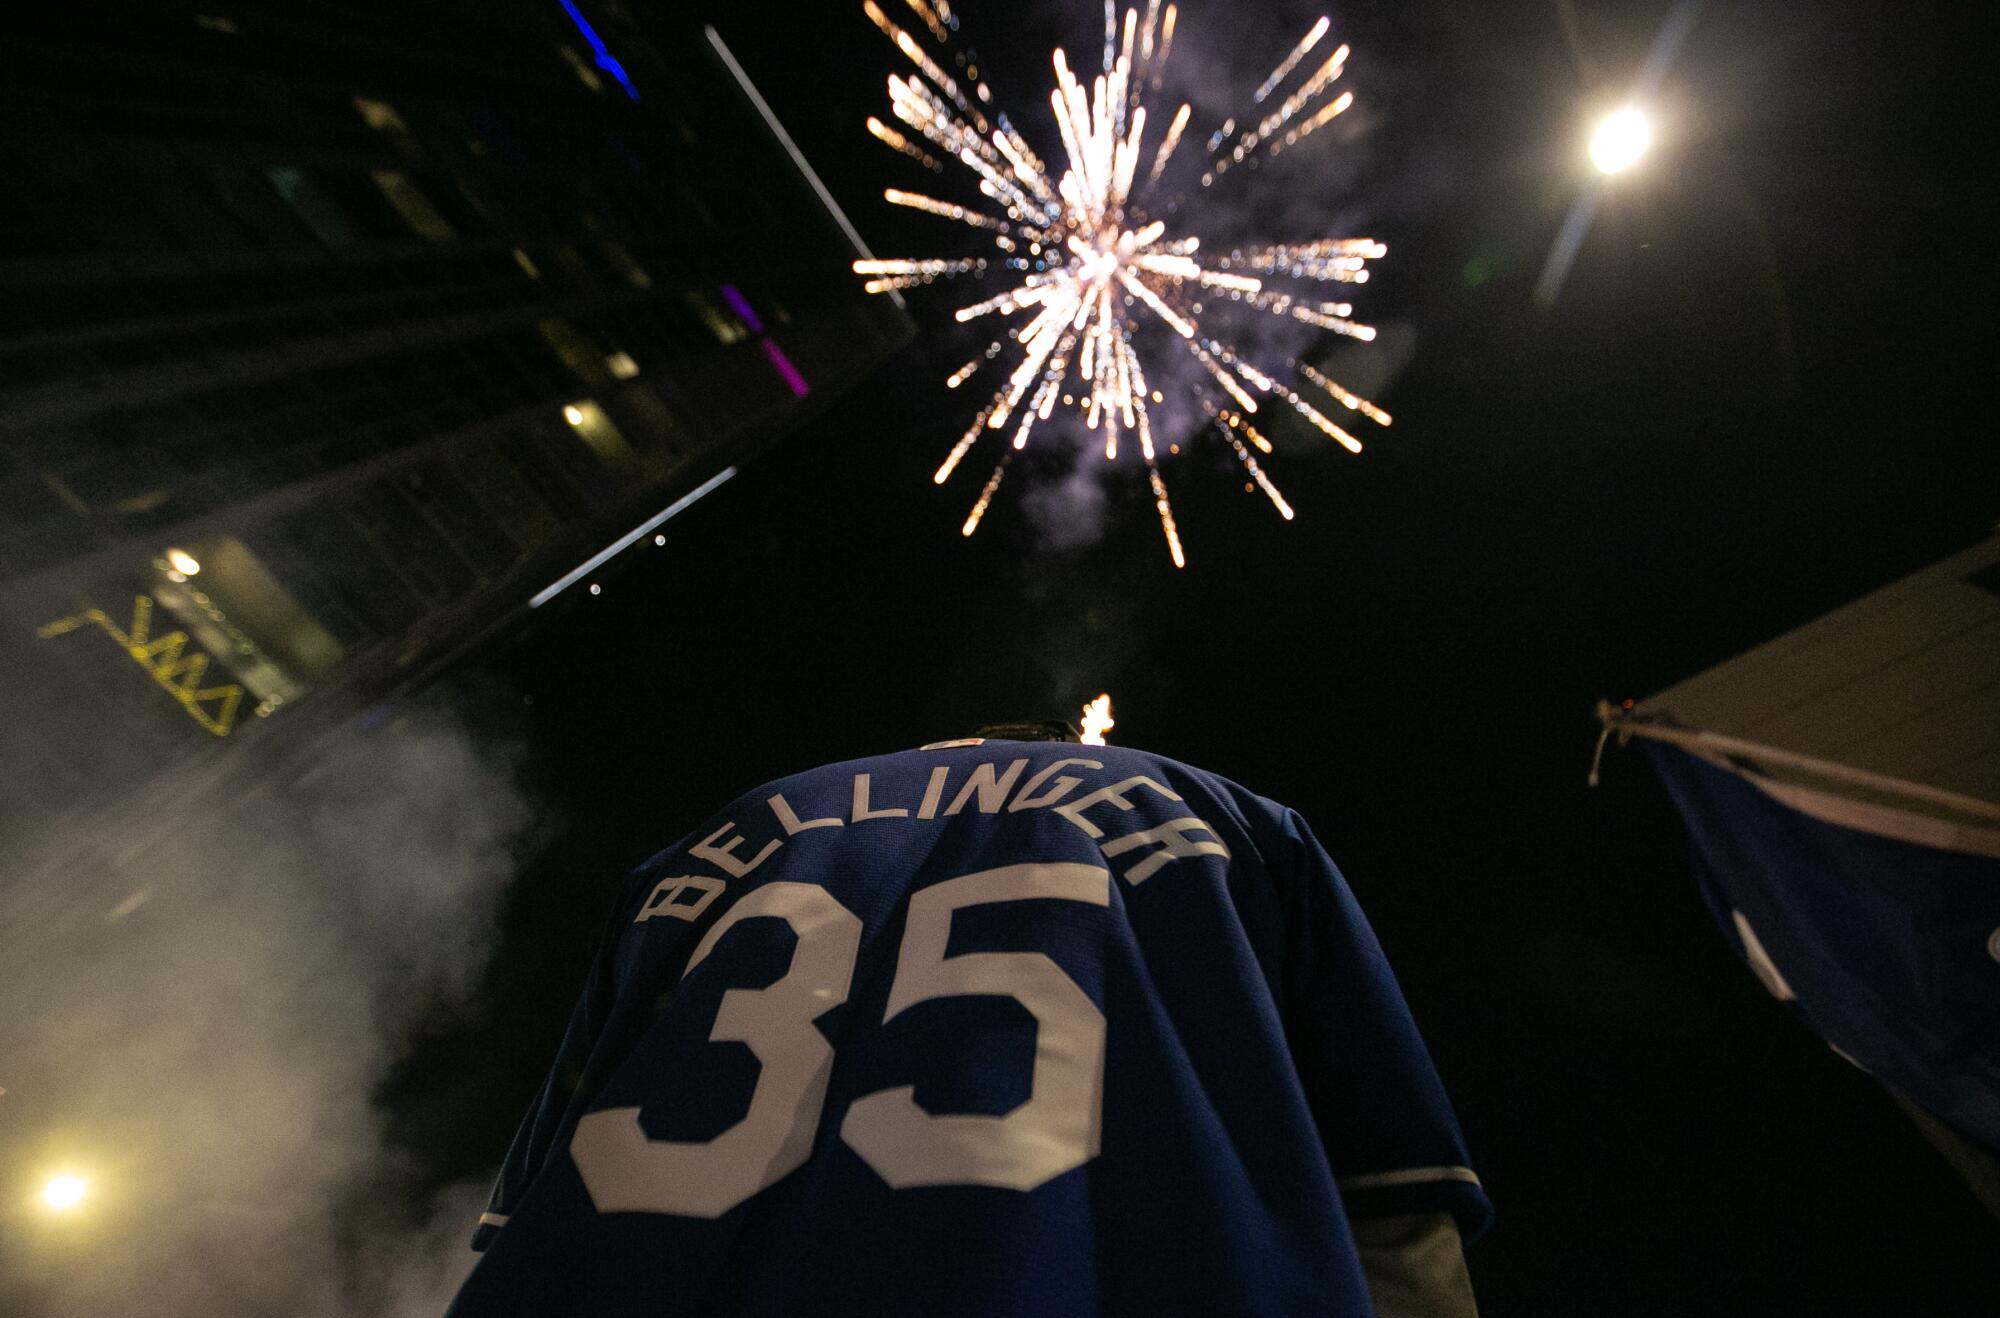 Fireworks explode in the sky above a fan in a Bellinger jersey.